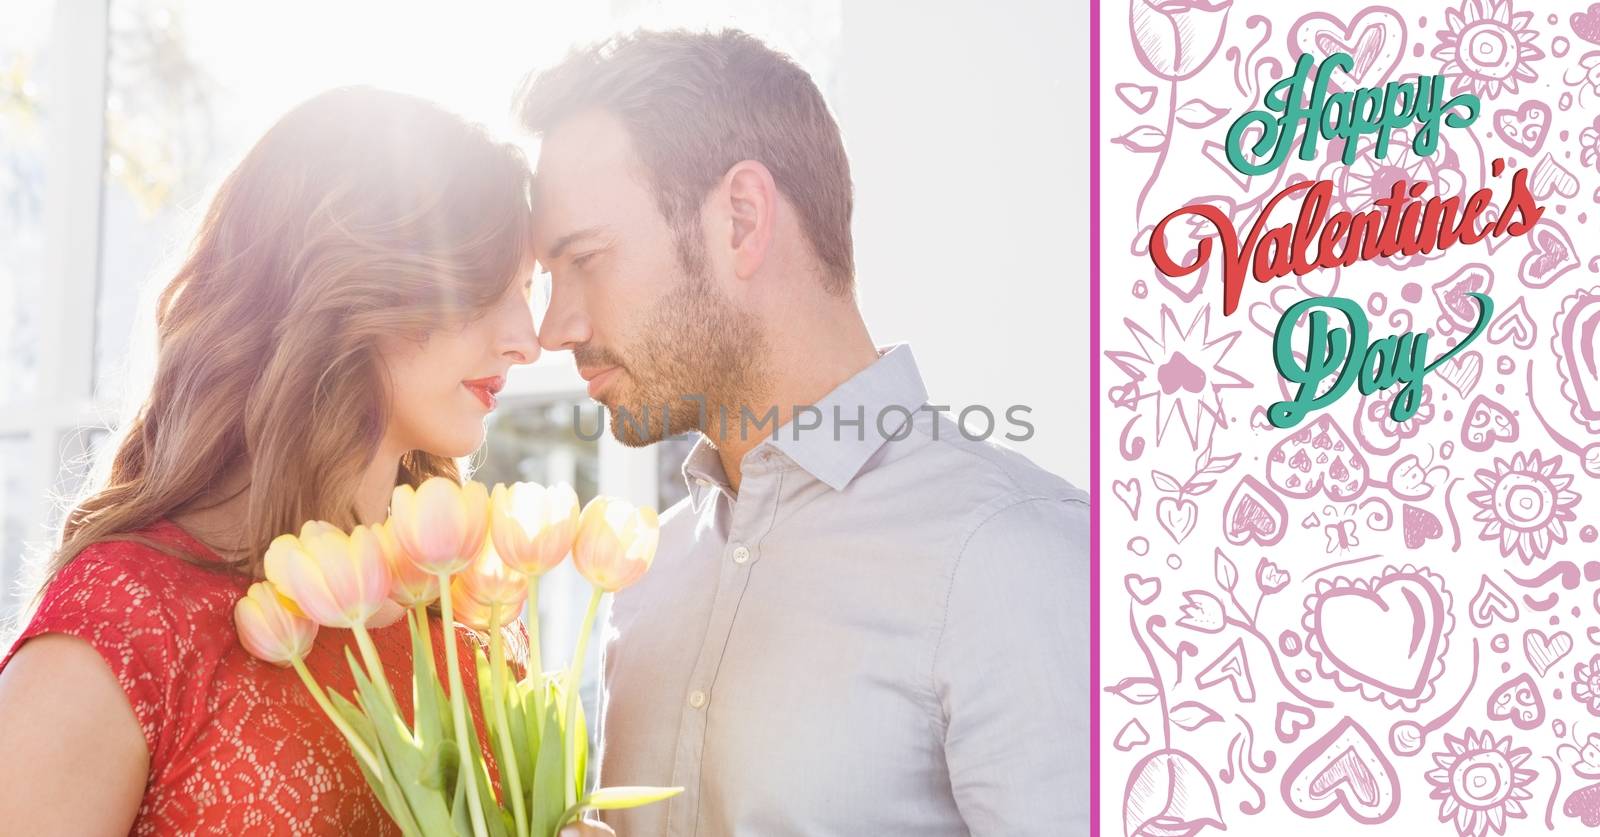 Composite image of romantic couple facing each other with valentines day text